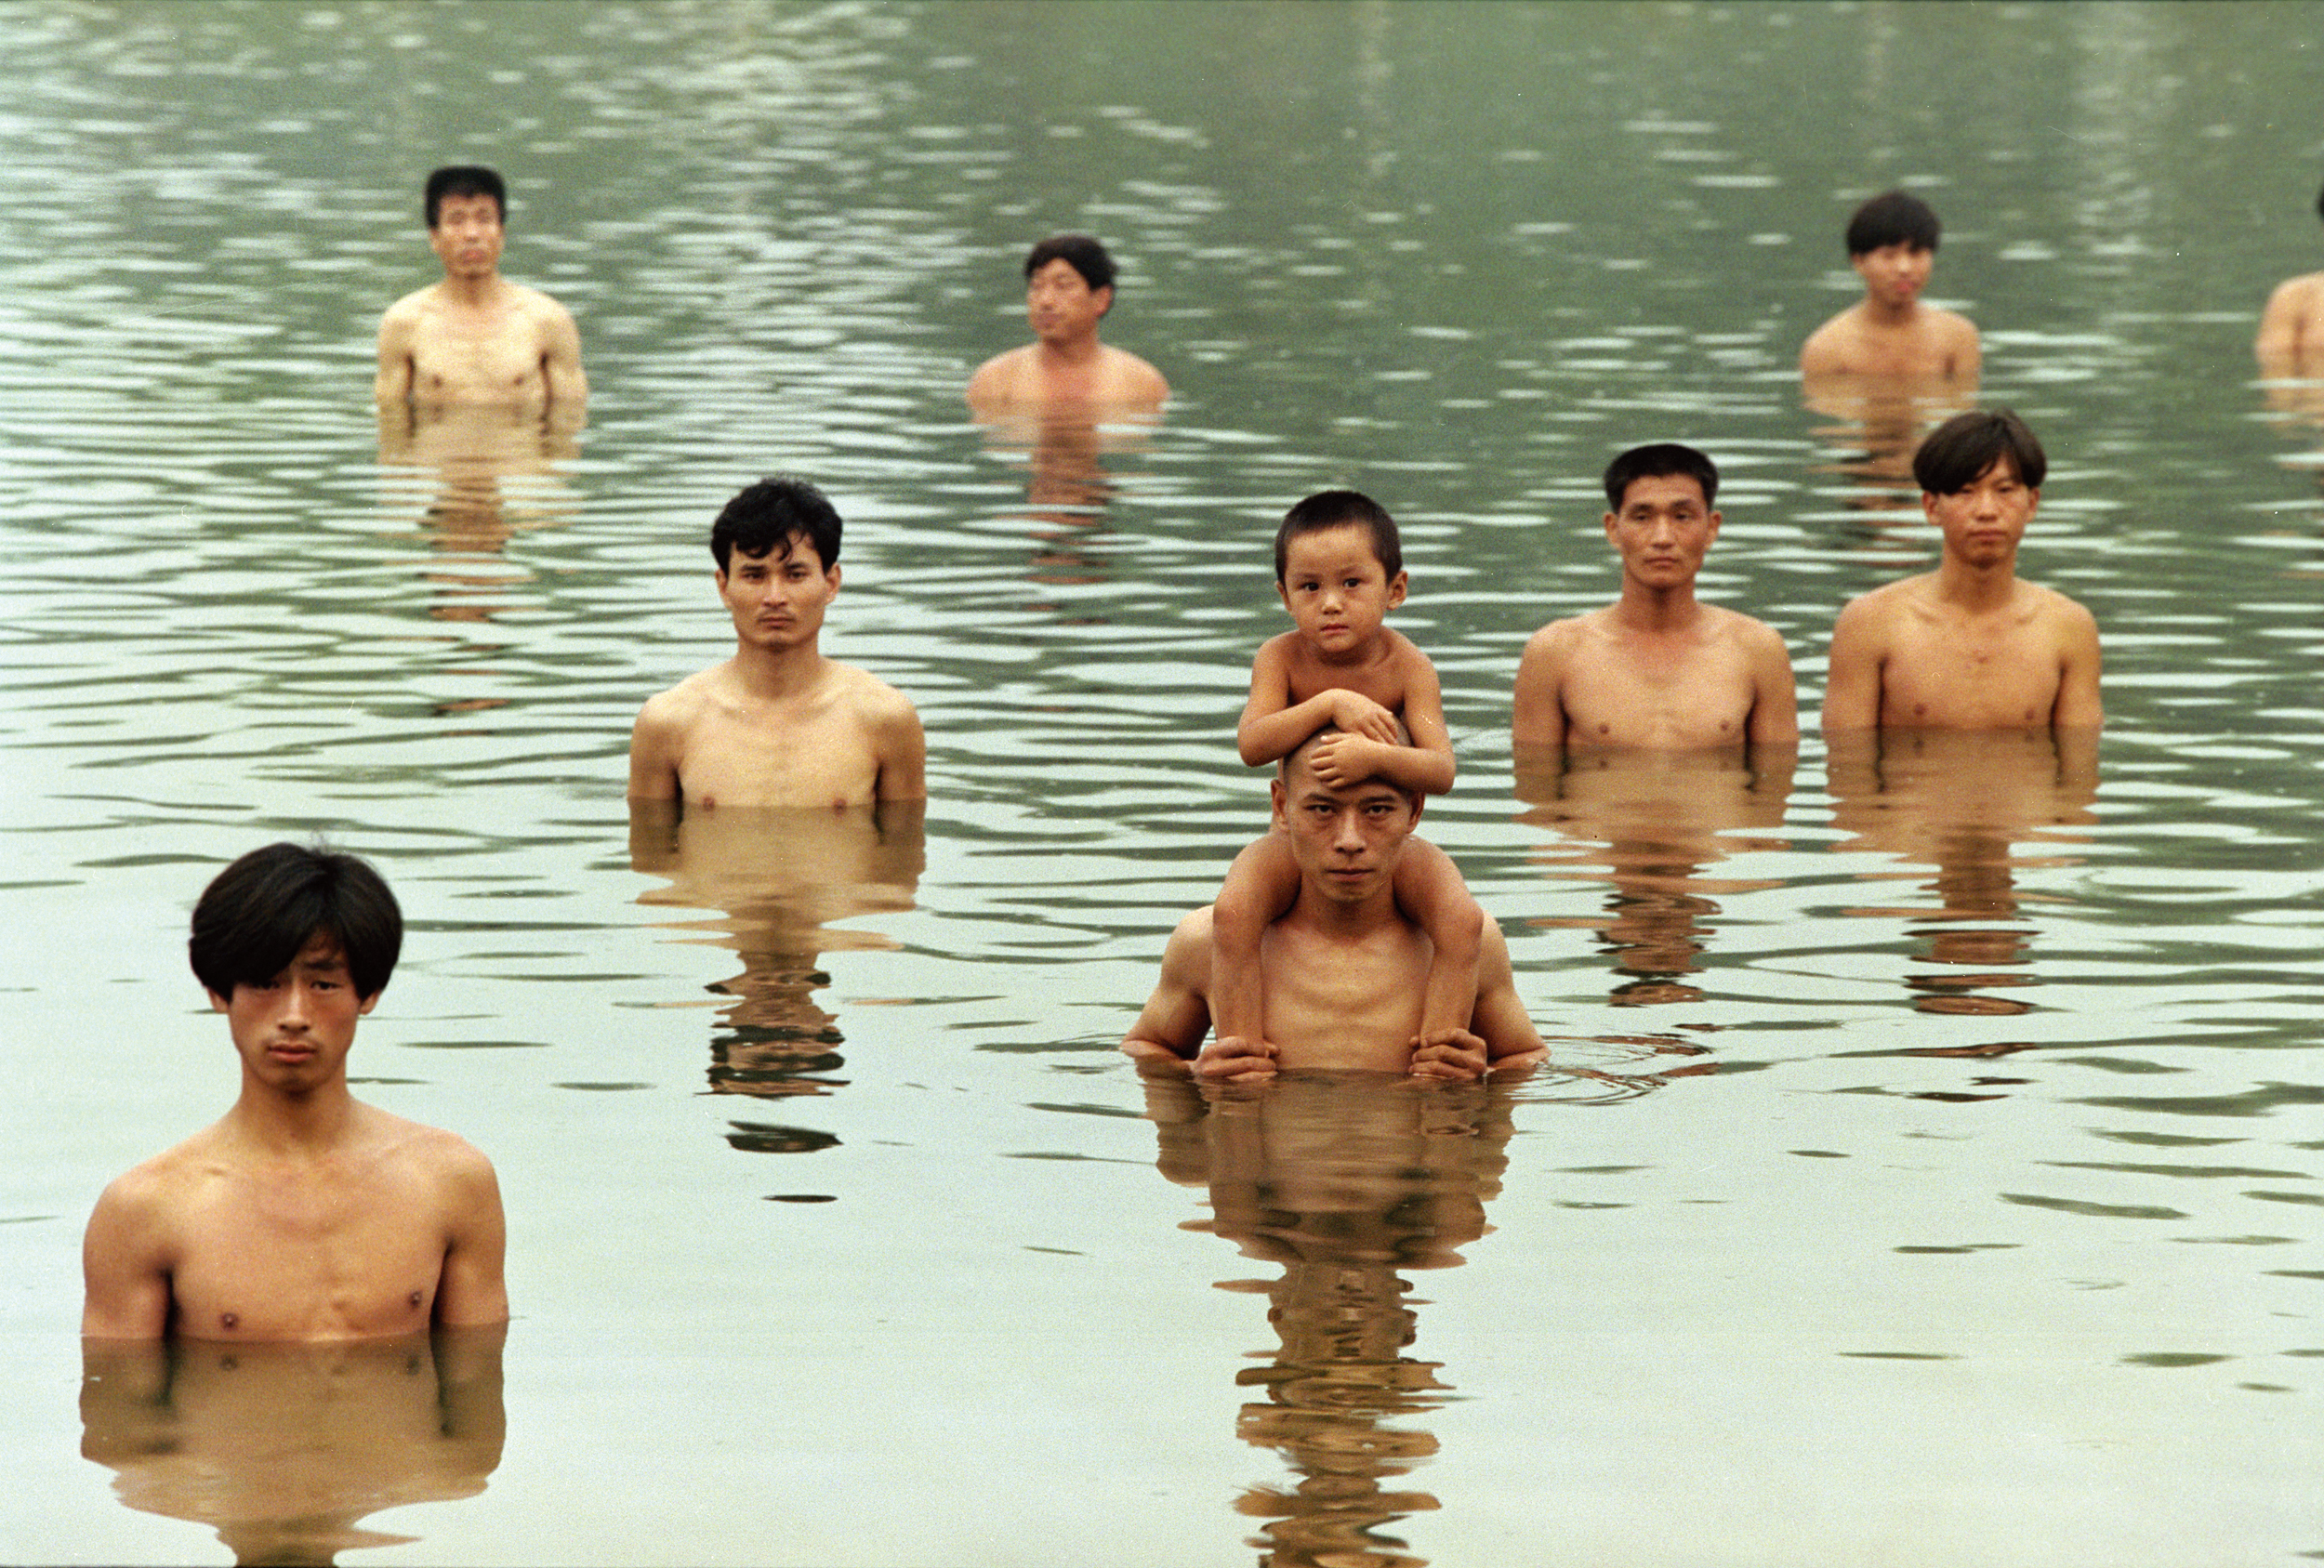 Zhang Huan – To Raise the Water Level in a Fishpond, 1997, 6 min 9 sec, Beijing, China